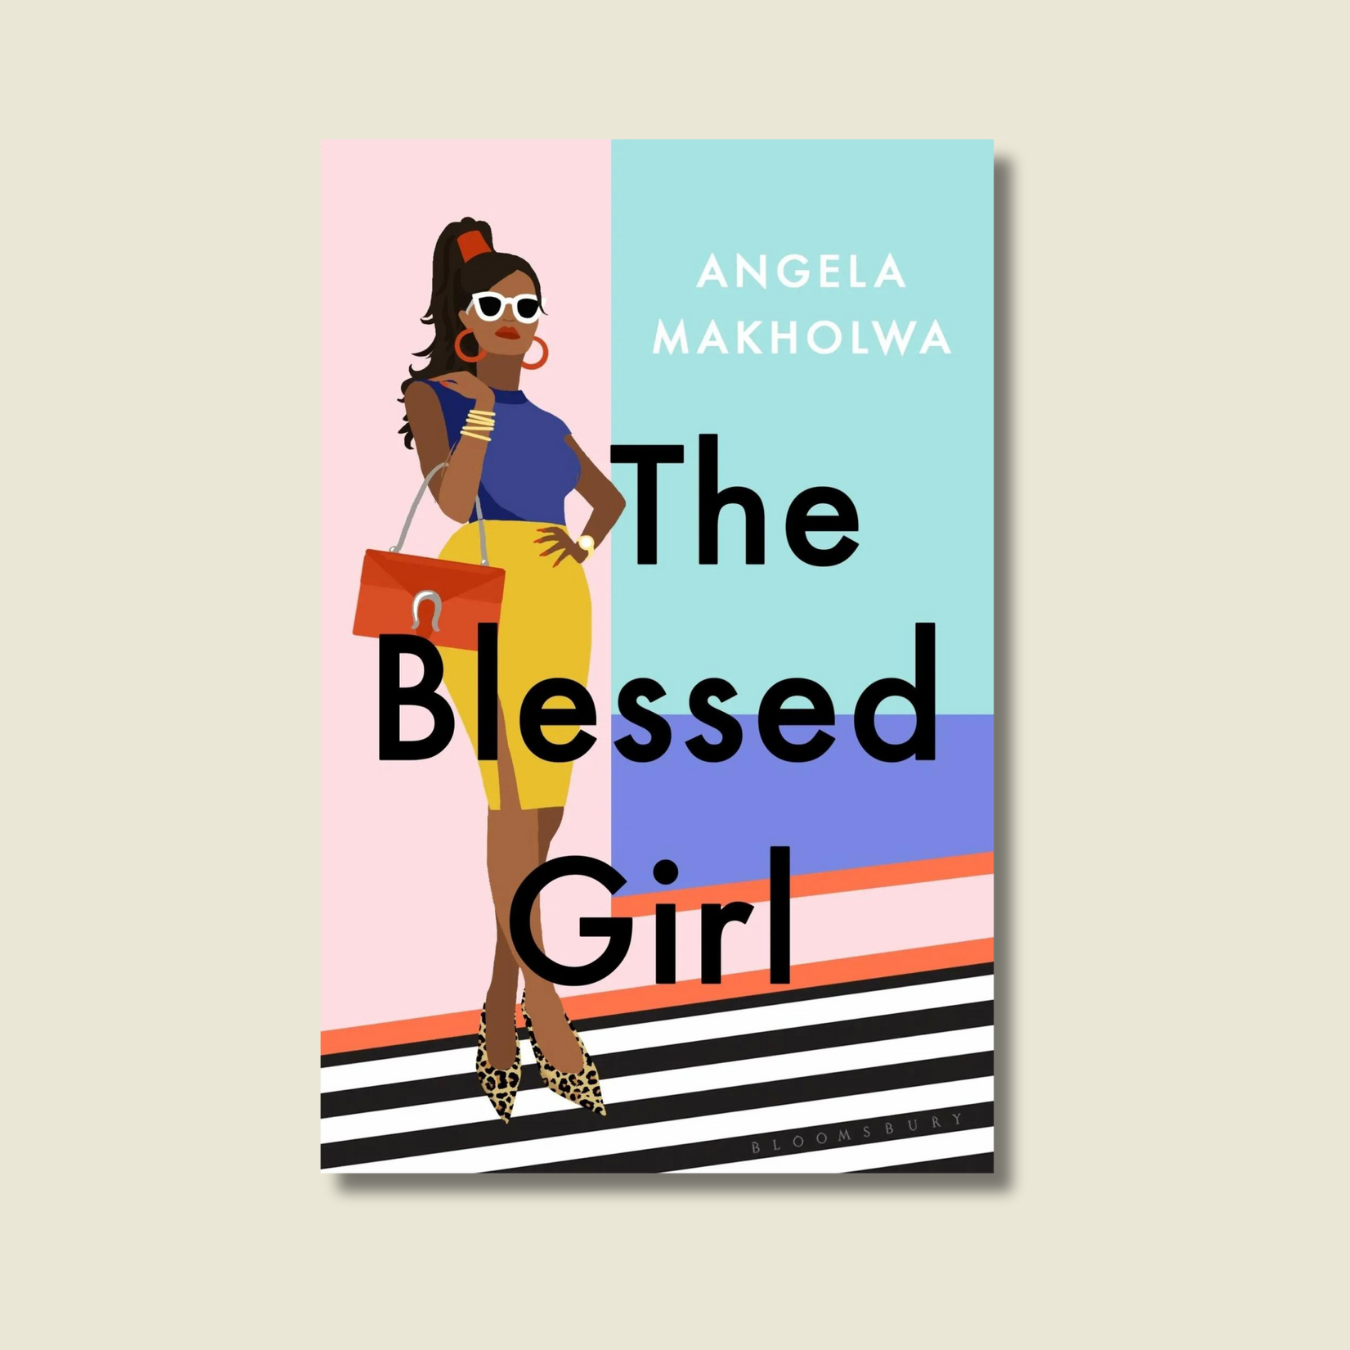 THE BLESSED GIRL BY ANGELA MAKHOLWA